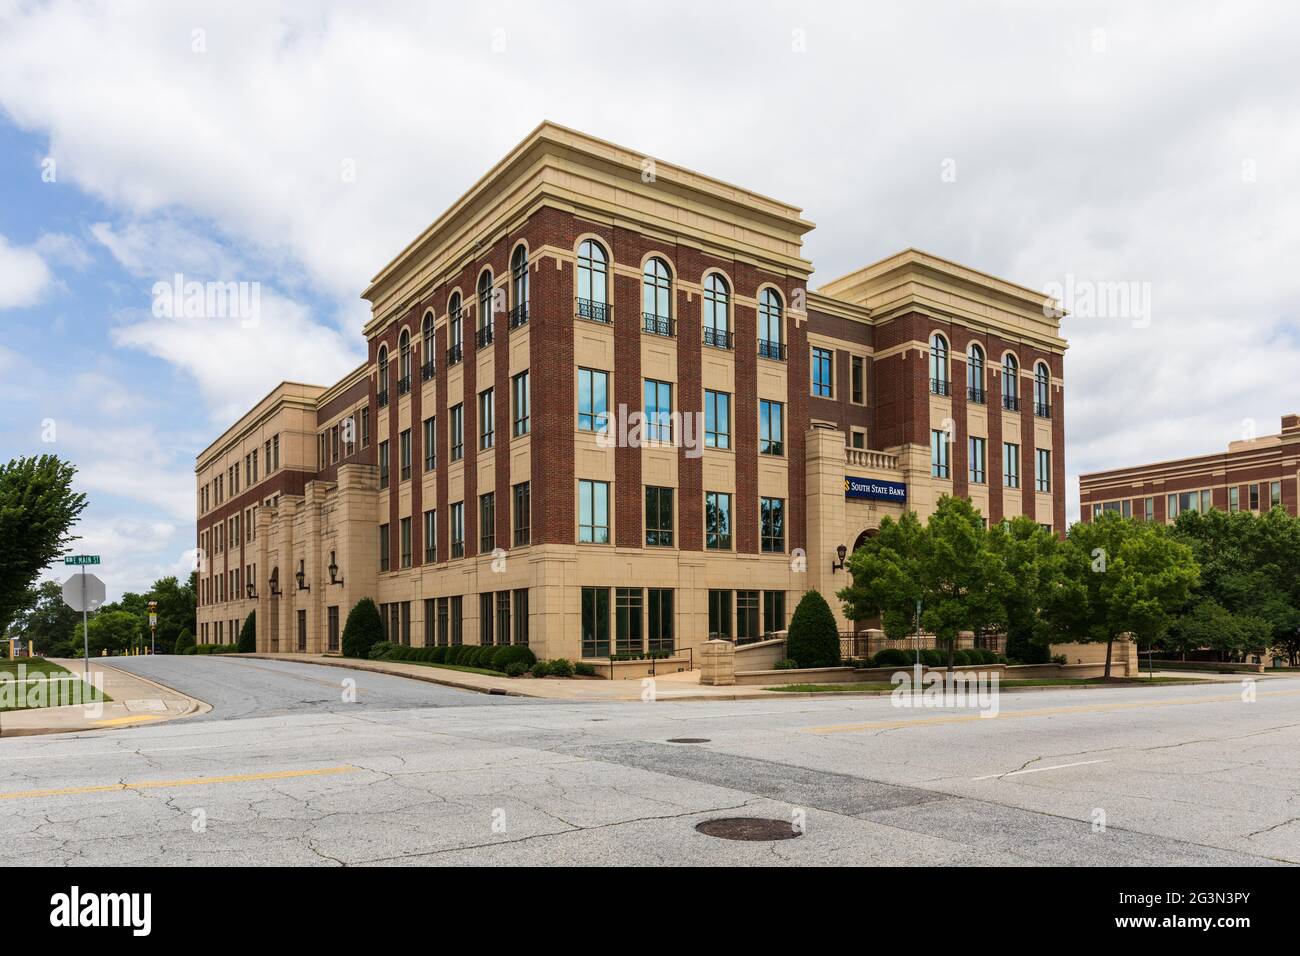 SPARTANBURG, SC, USA-13 JUNE 2021: Diagonal front view of the South State Bank building on Main St.  Horizontal image. Stock Photo